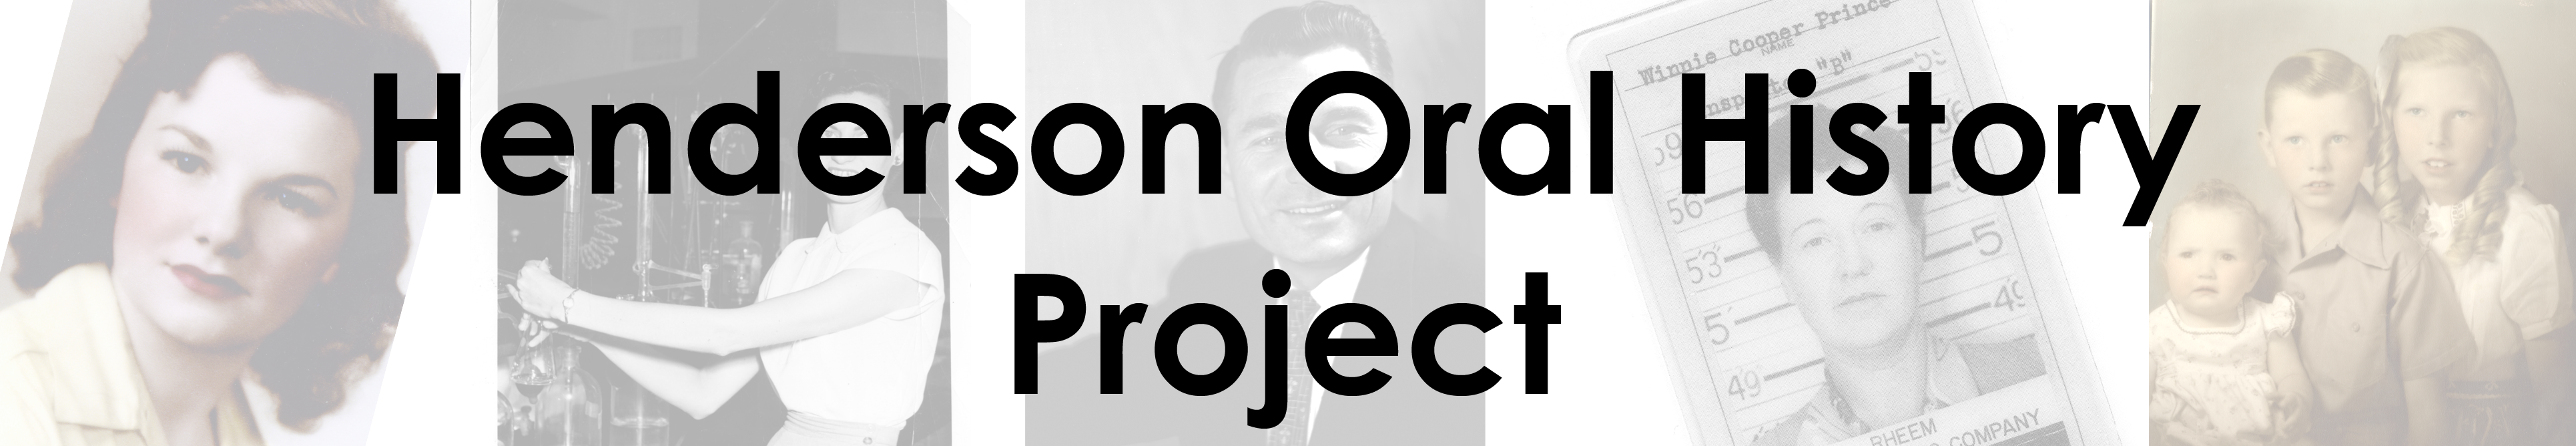 Henderson Oral History Project